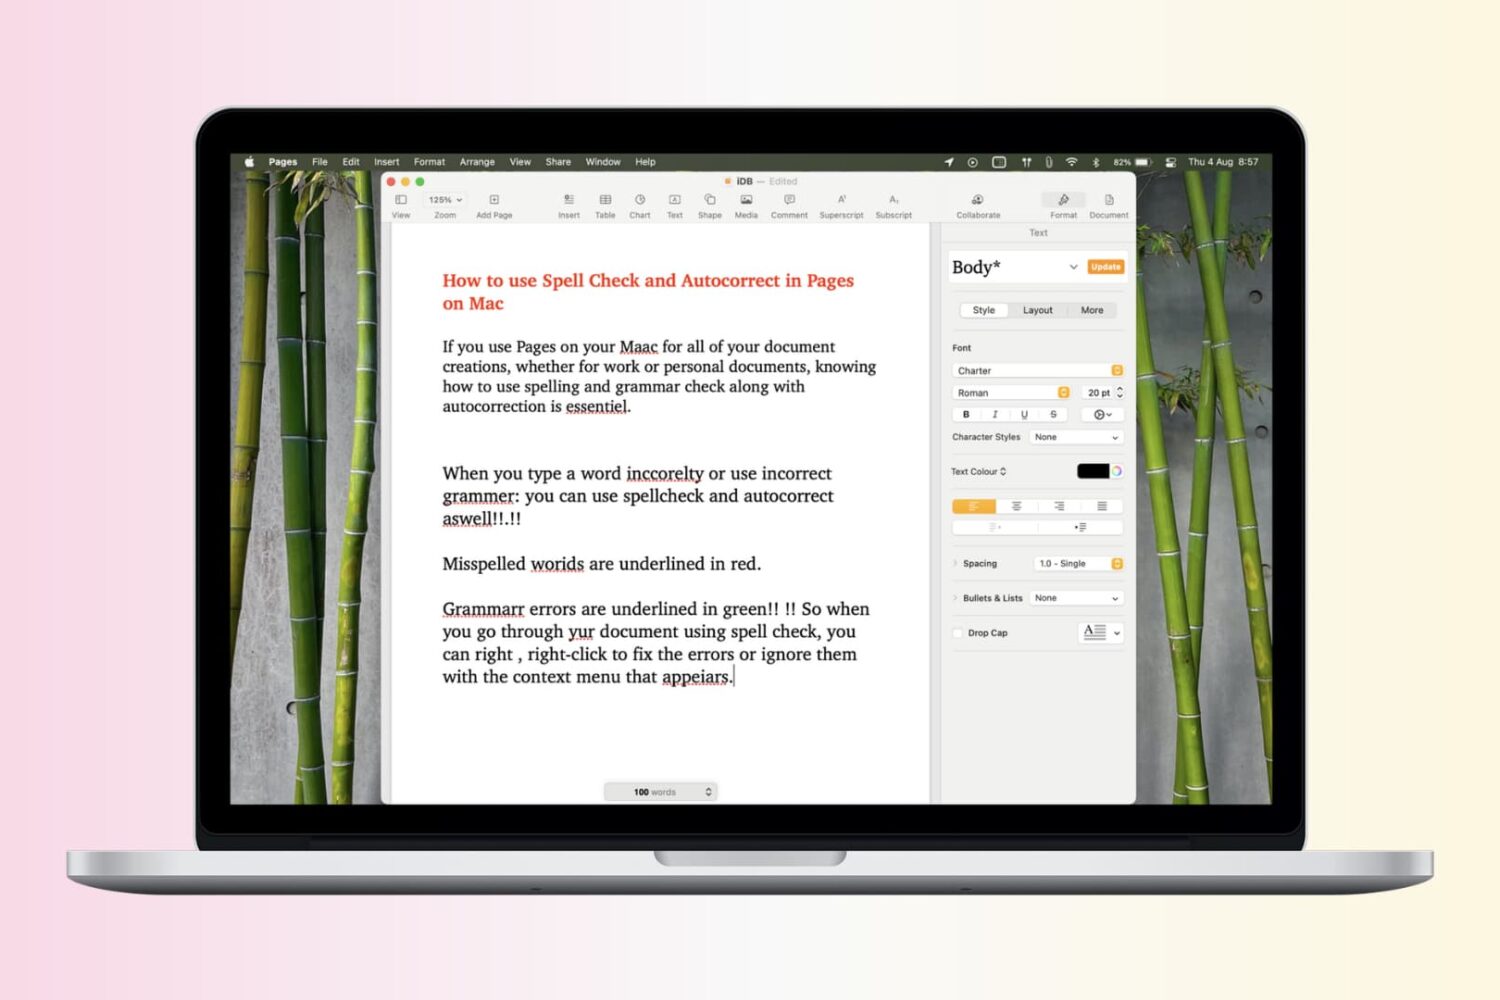 Auto-correct and spell check in the Pages app on Mac